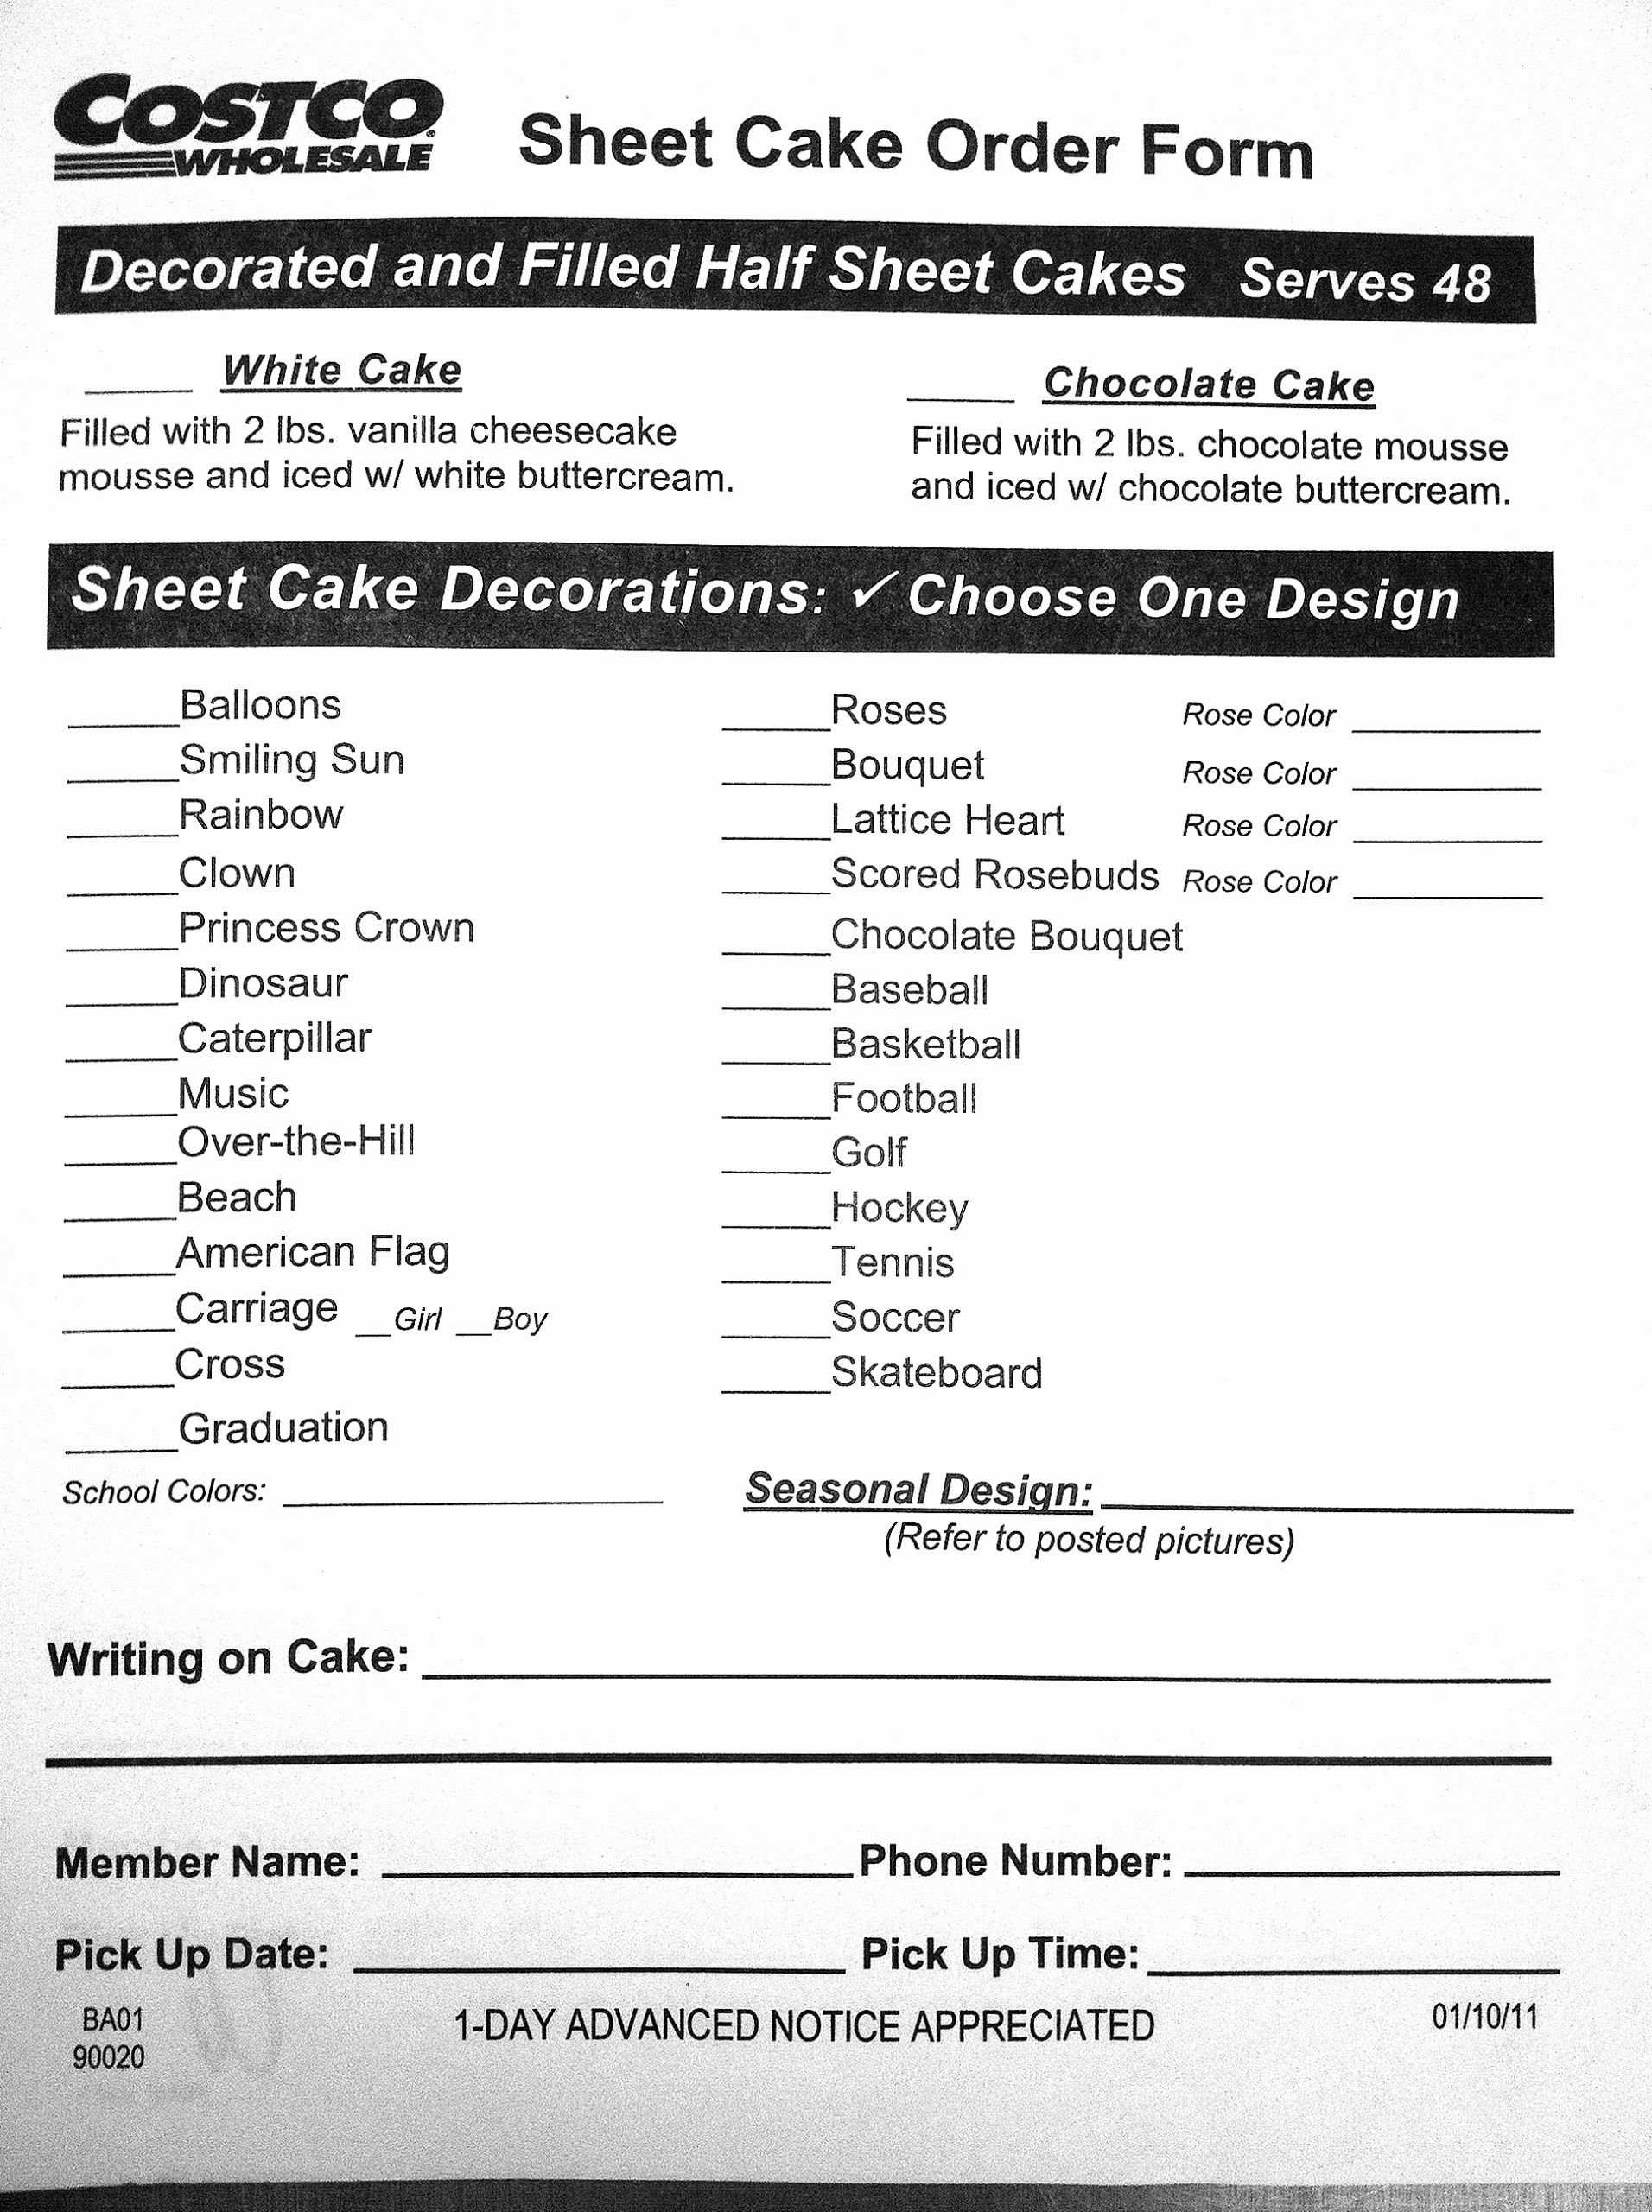 Special order form Template Fresh Costco Us Bakery Sheet Cake order form